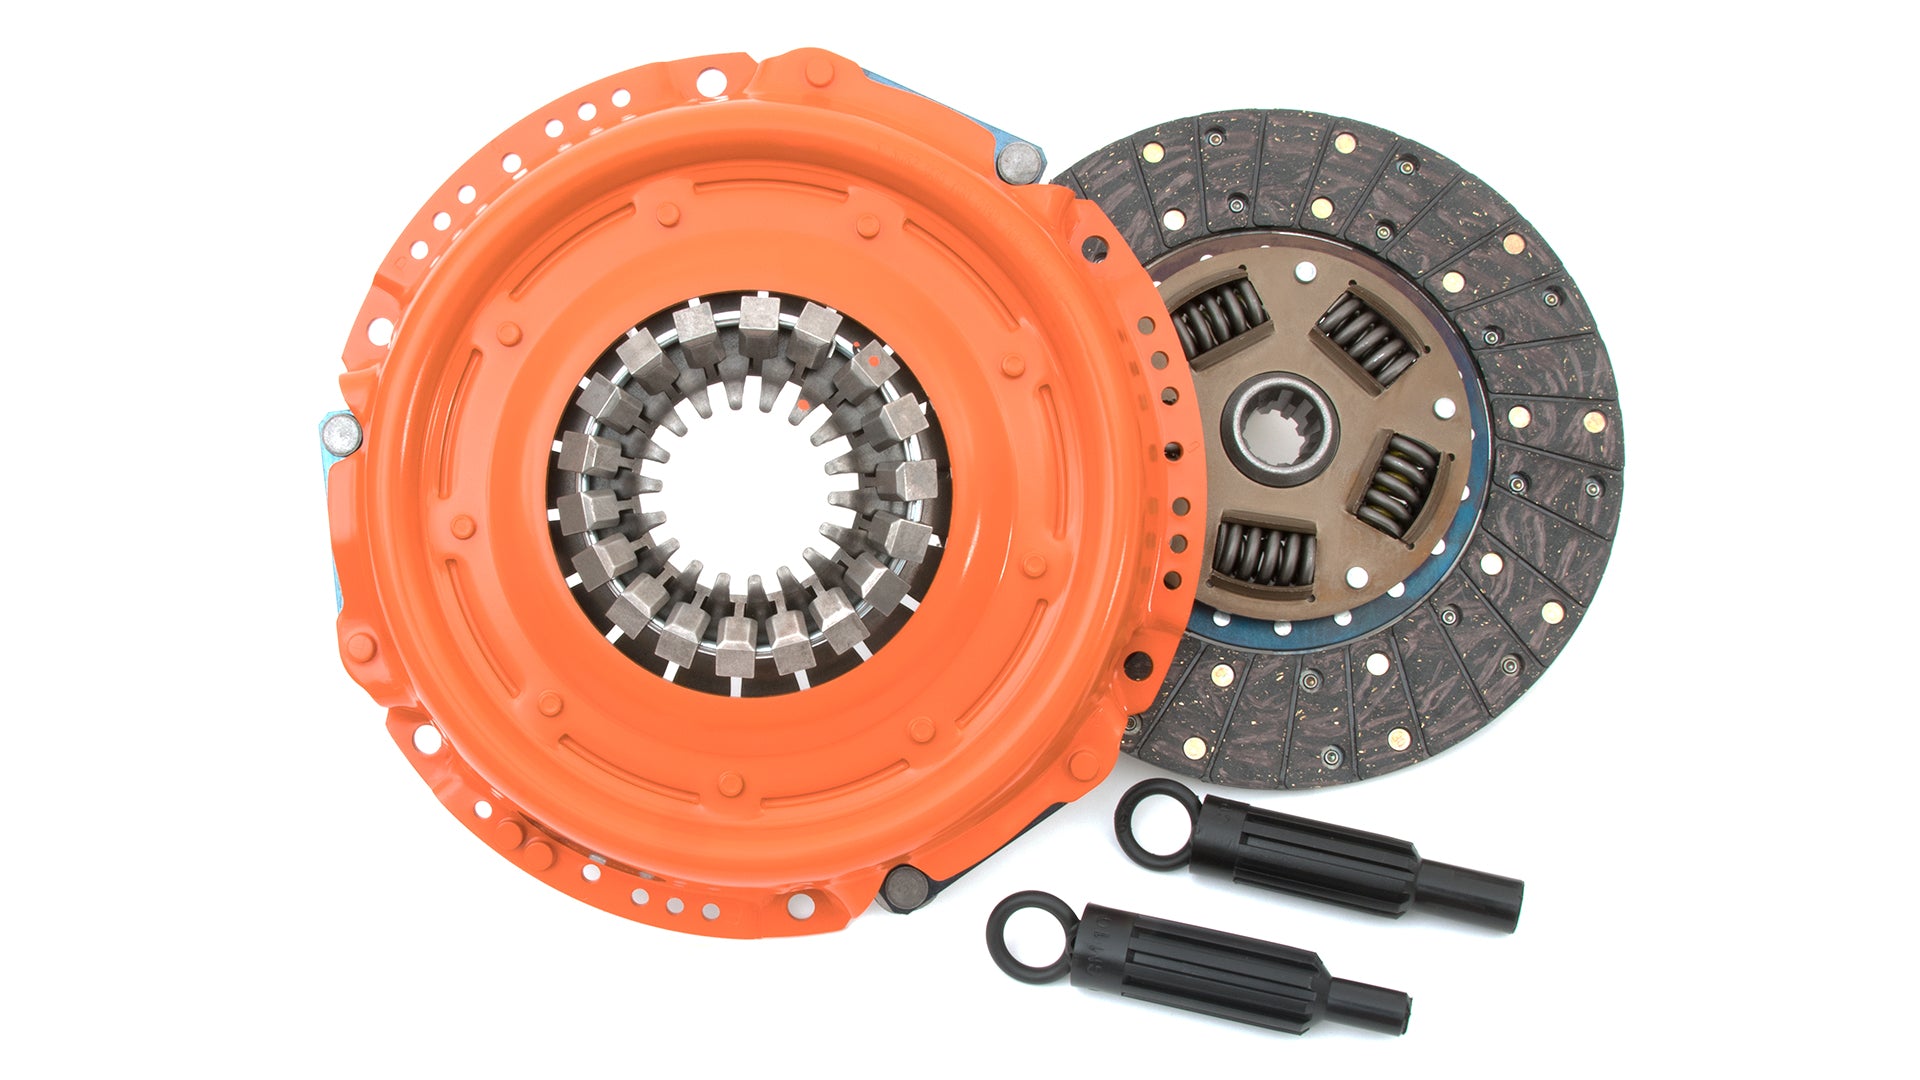 Dual Friction(R), Clutch Pressure Plate and Disc Set